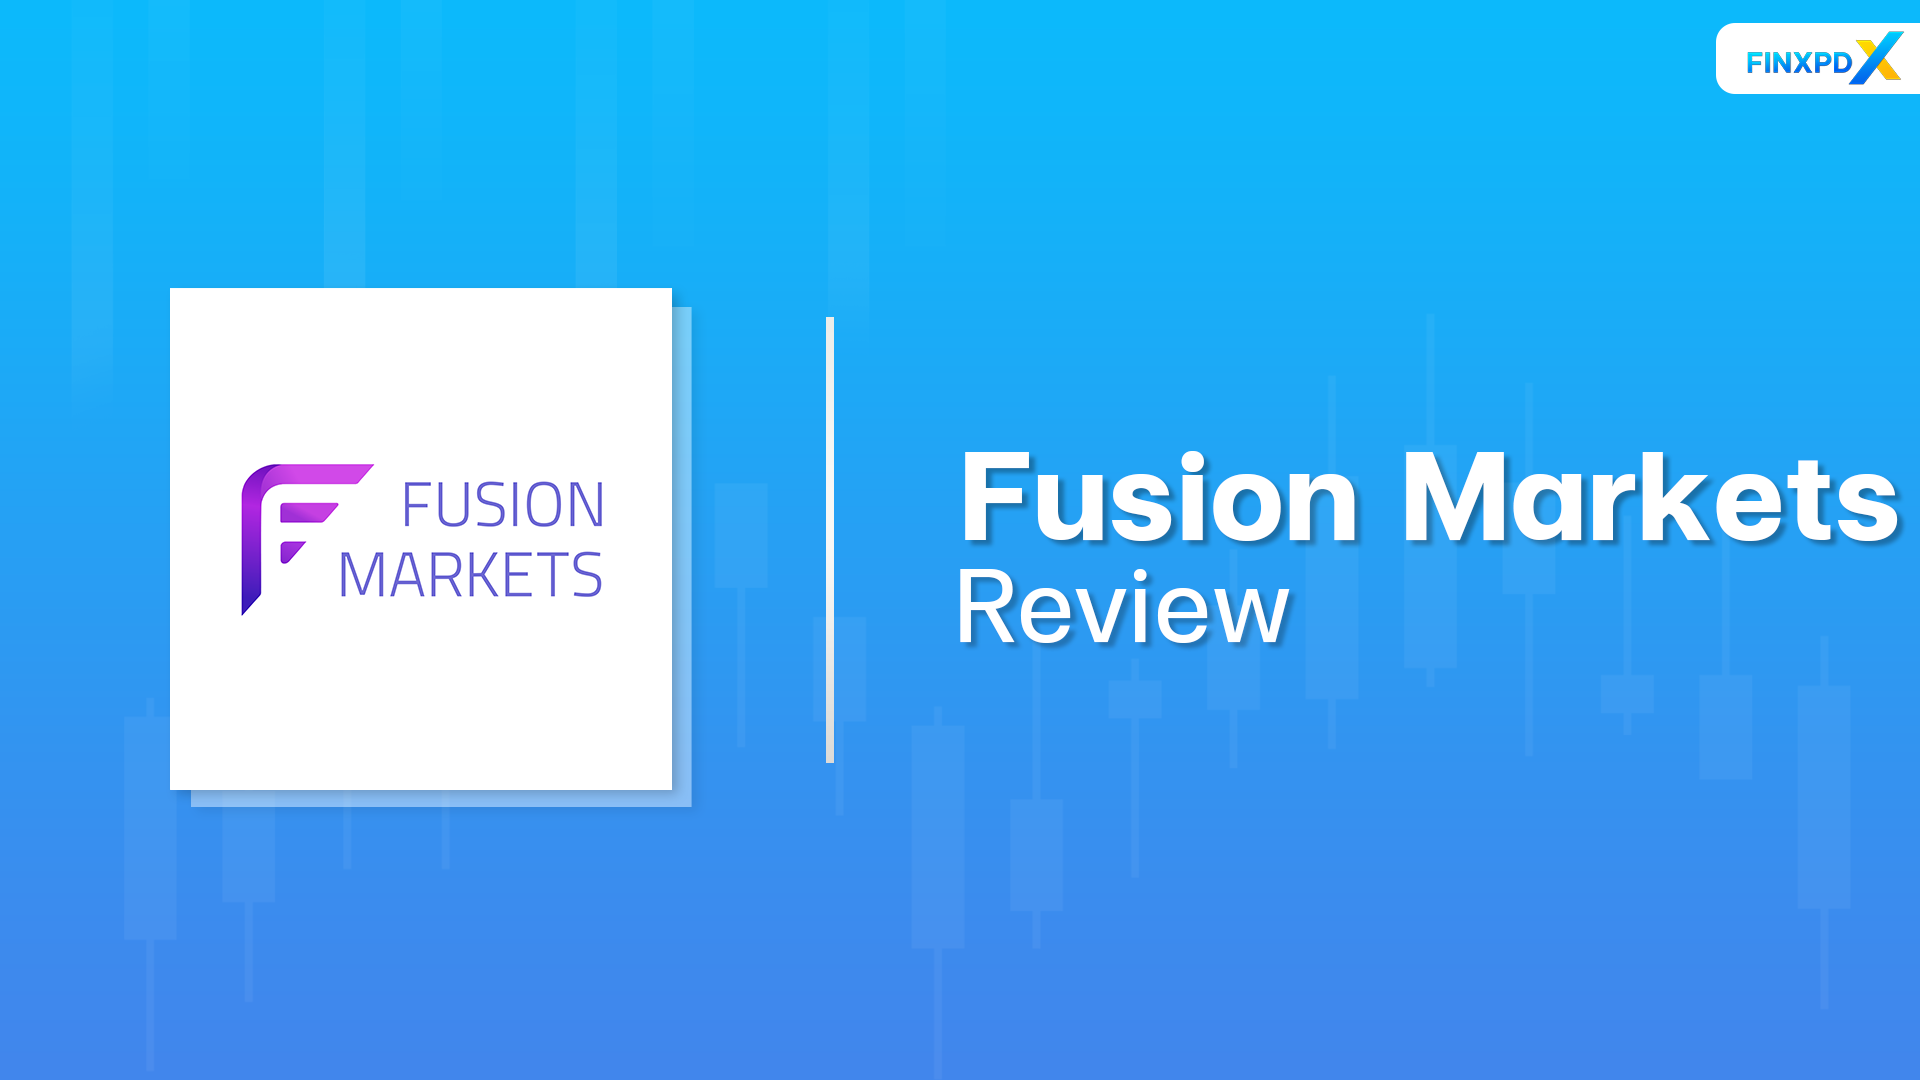 Fusion Markets: Exclusive About the Offshore Regulated